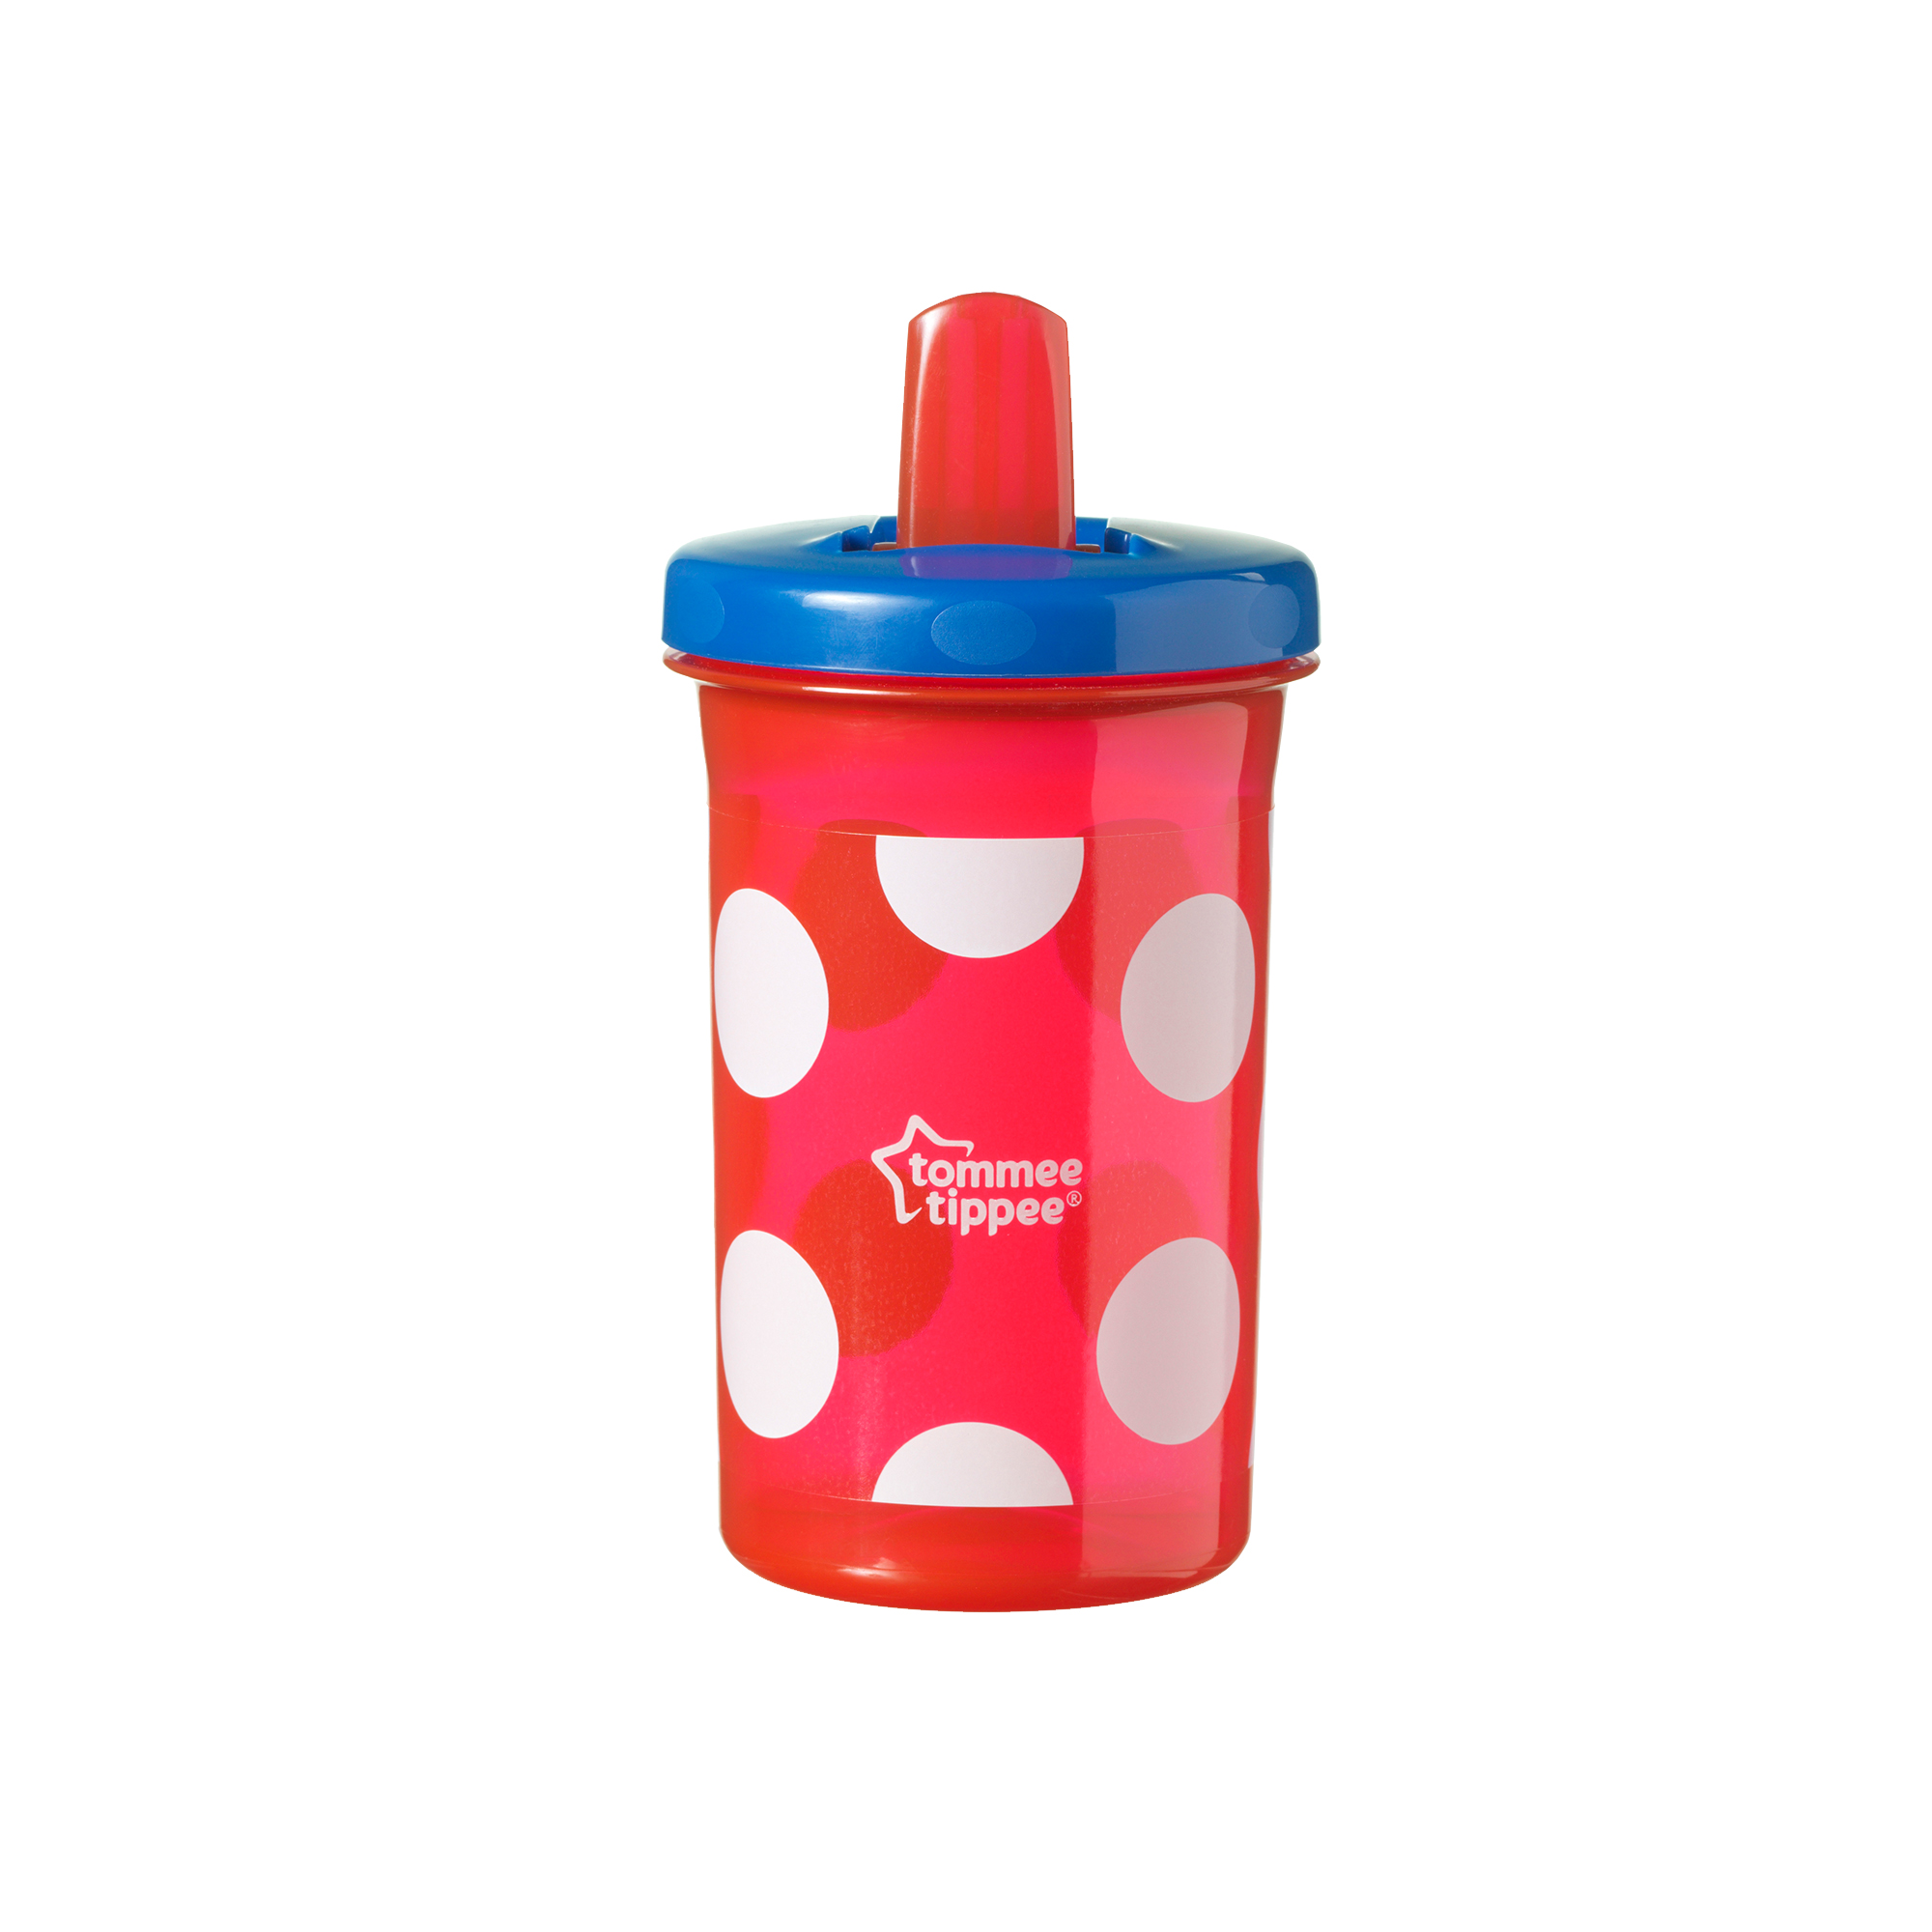 Cana Cool Cup, Tommee Tippee, 18luni+, 380ml, Rosu image 2